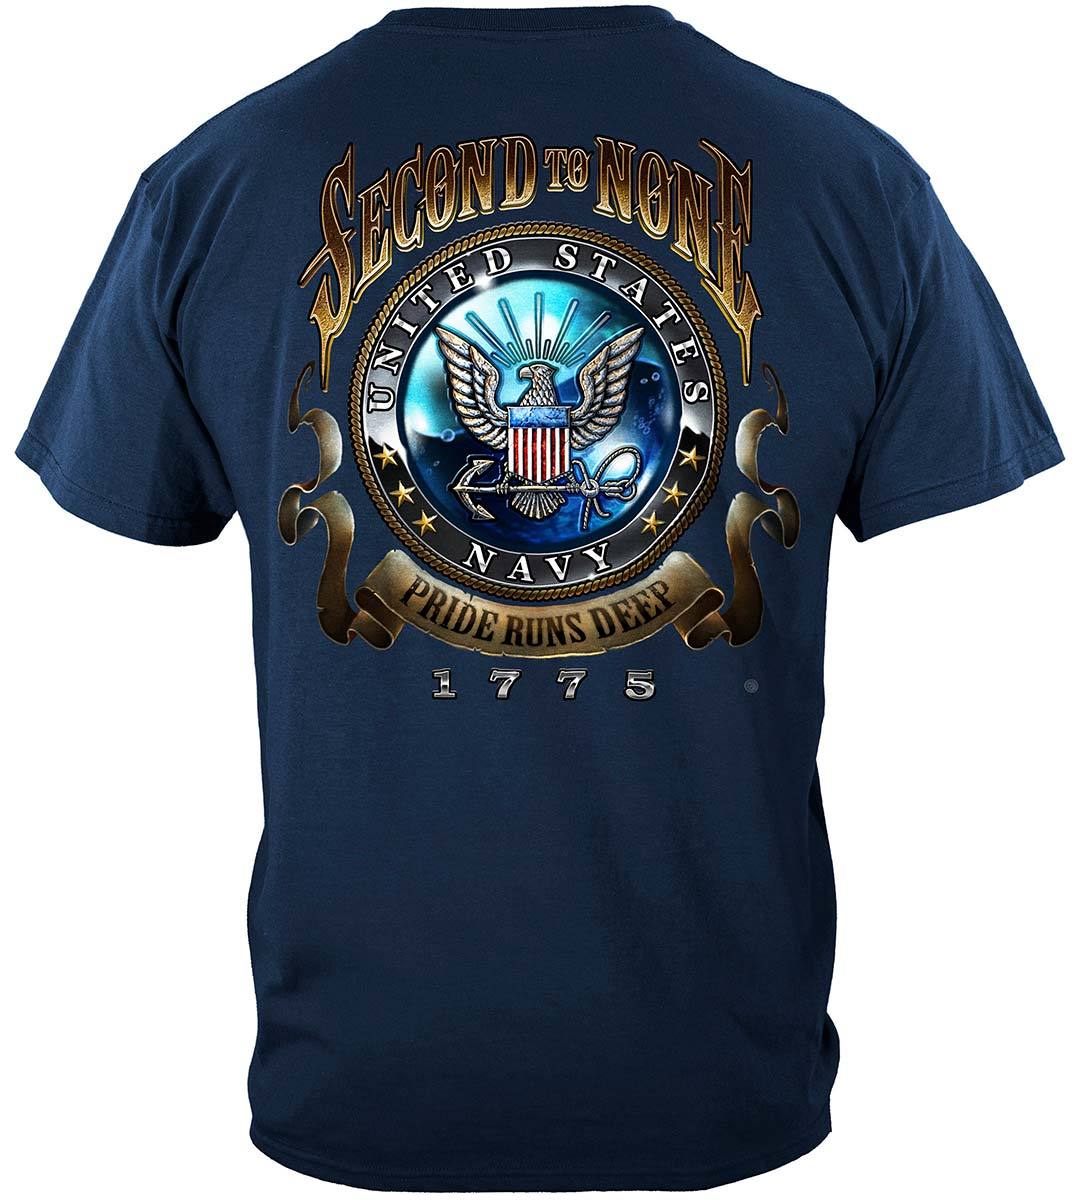 US NAVY Second To None Premium Long Sleeves